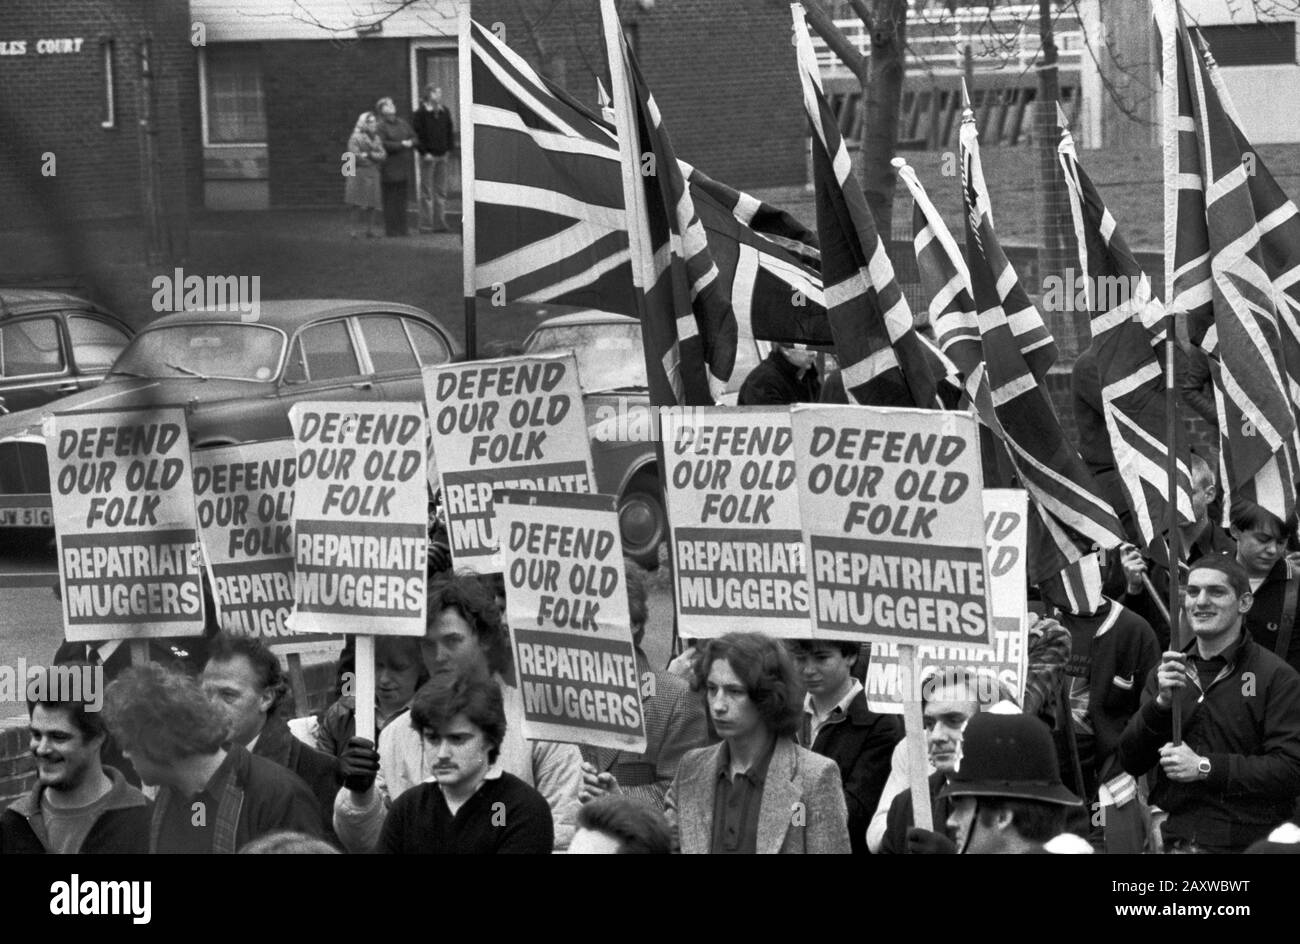 National Front march through Southwark South London 1980. Banner say, Defend Our Old Folk Repatriate Muggers. 1980s UK HOMER SYKES Stock Photo